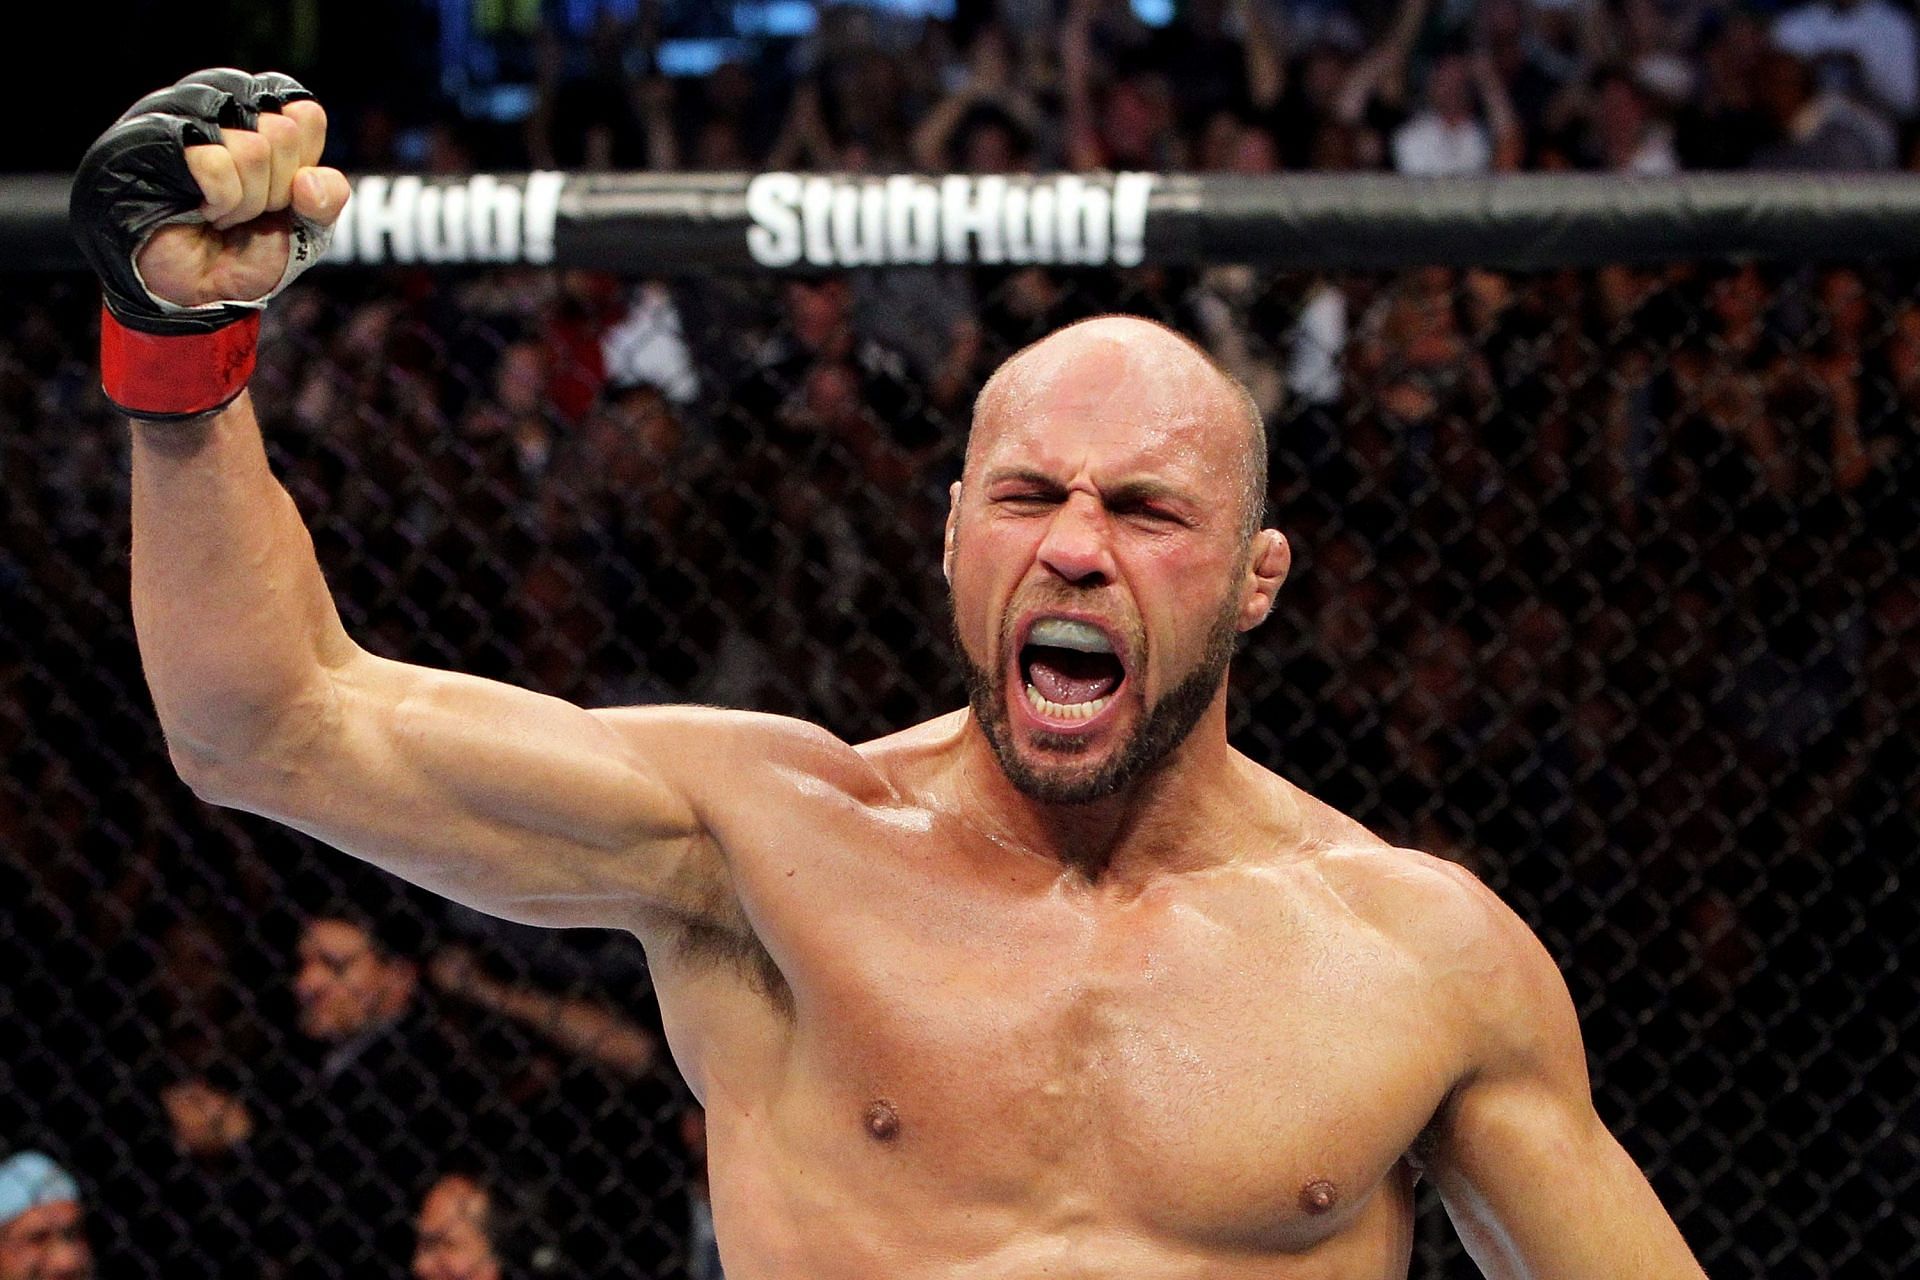 Randy Couture only ended his UFC career shortly before his 50th birthday